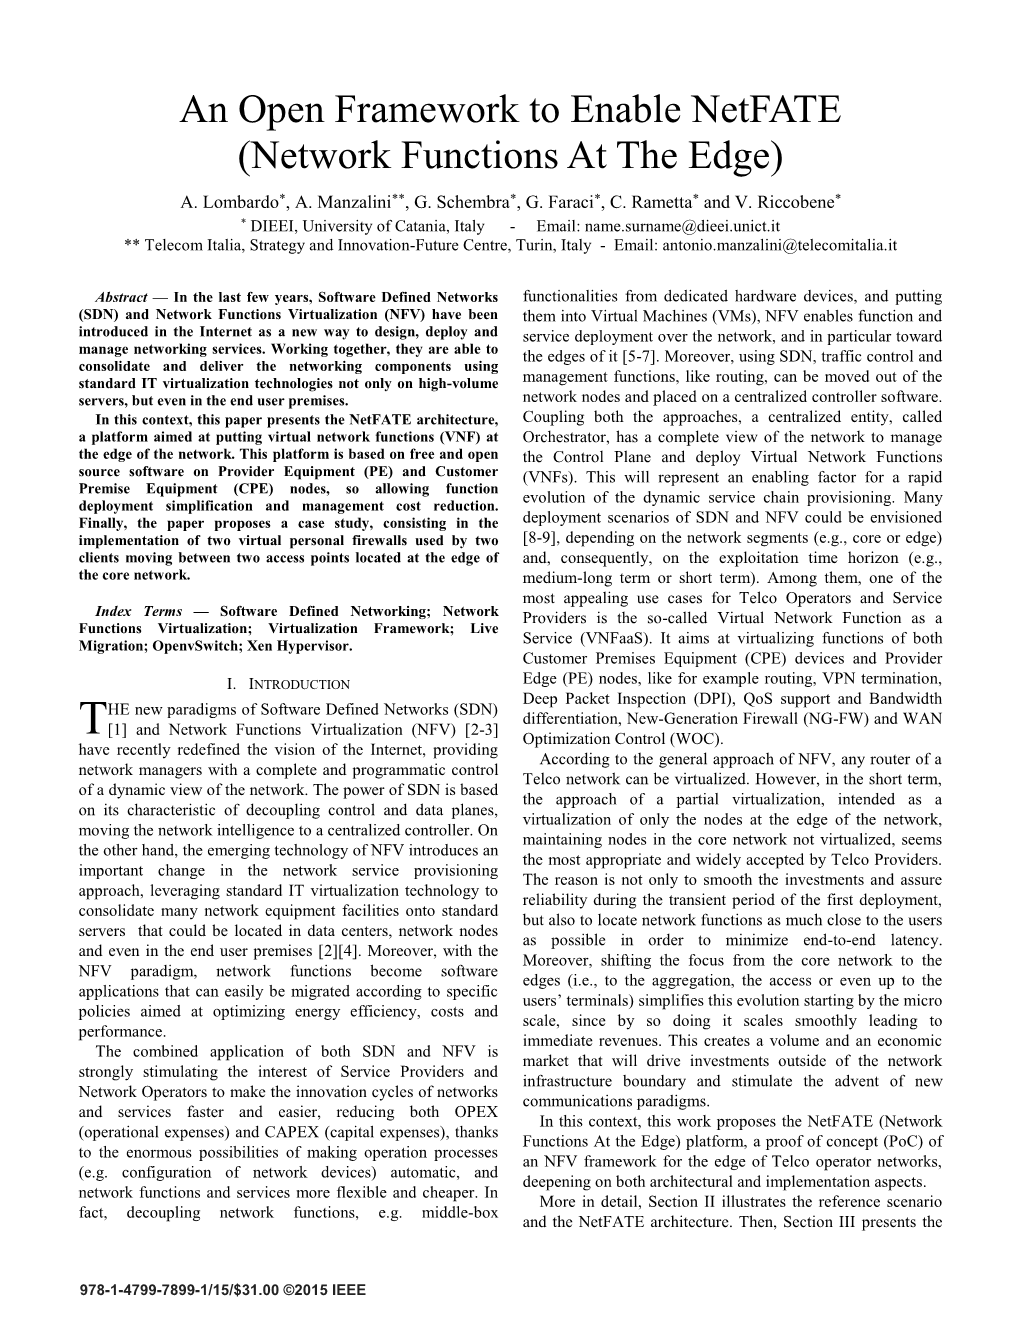 Network Functions at the Edge)